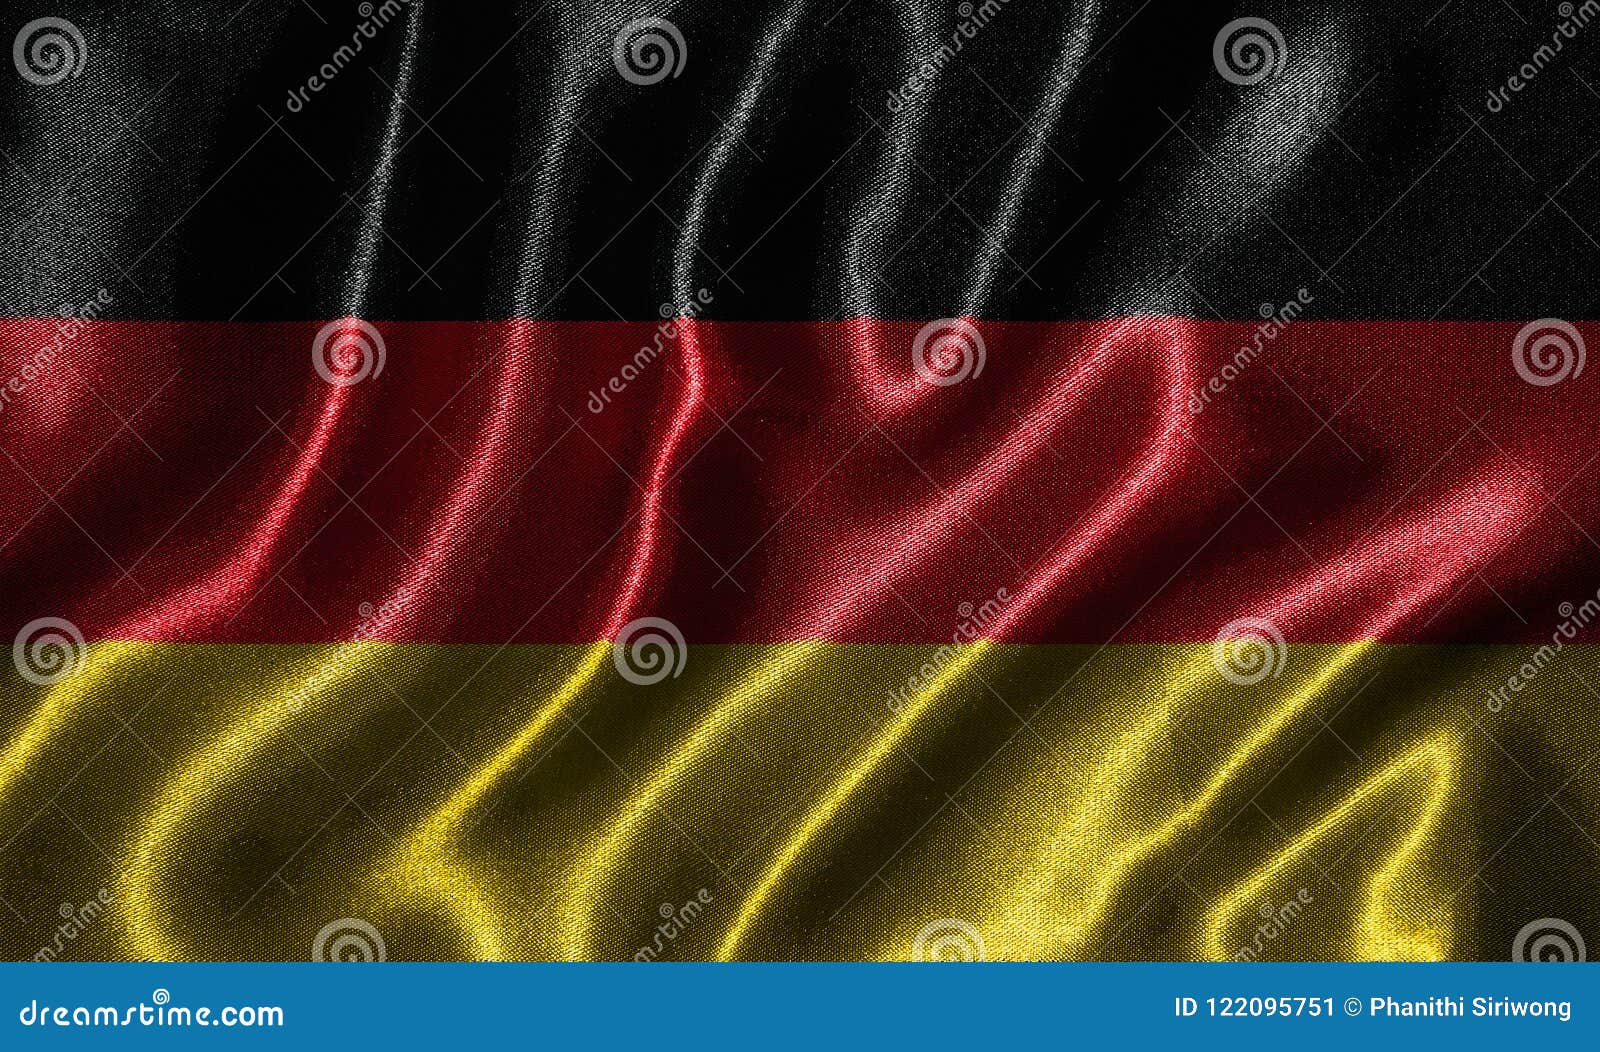 Bdsm Toys For Pain And Pleasure Laying On German Flag Stock Photo, Picture  and Royalty Free Image. Image 99280311.